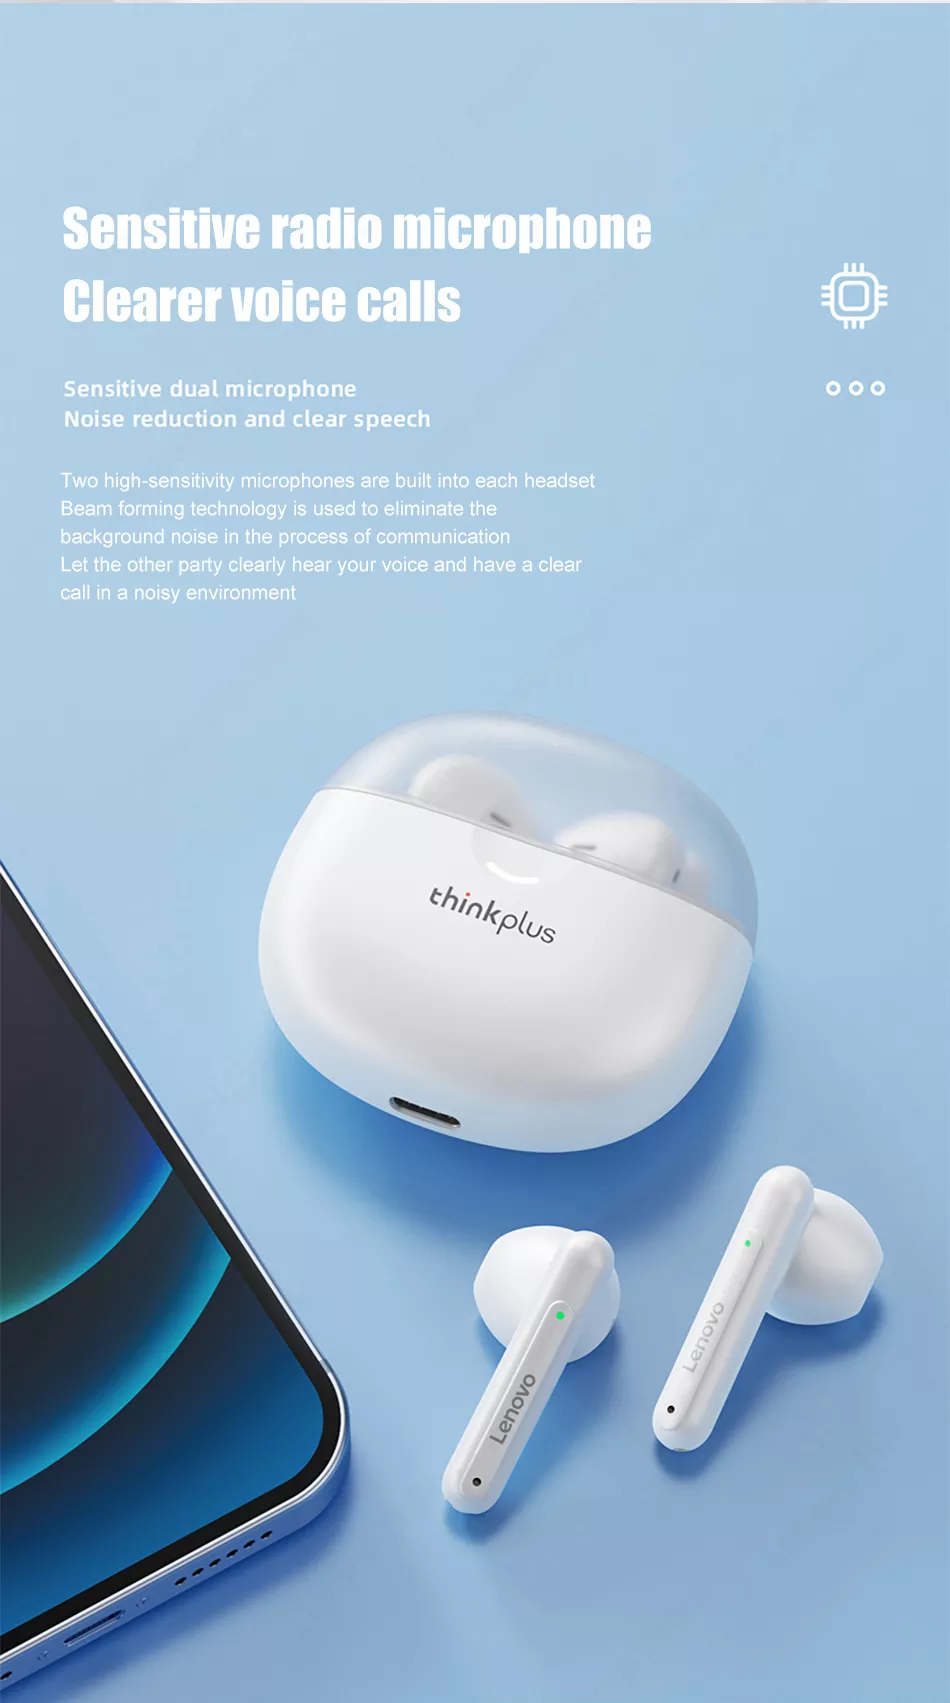 9A5Bb86E69 Lenovo &Lt;H1&Gt;Lenovo Lp1 Pro True Wireless Earbuds - Black&Lt;/H1&Gt; Https://Www.youtube.com/Watch?V=Wd8Fwszv0Z4 &Lt;Ul&Gt; &Lt;Li&Gt;&Lt;Span Class=&Quot;A-List-Item&Quot;&Gt;Bt5.1 Chip Provides Faster Connection, More Stability, Lower Latency, And Lower Power Consumption.&Lt;/Span&Gt;&Lt;/Li&Gt; &Lt;Li&Gt;&Lt;Span Class=&Quot;A-List-Item&Quot;&Gt;Hifi High Sound Quality, It Can Make Music More Real&Lt;/Span&Gt;&Lt;/Li&Gt; &Lt;Li&Gt;&Lt;Span Class=&Quot;A-List-Item&Quot;&Gt;10Mm Large Dynamic Driver, Highly Sensitive Composite Diaphragm, Highly Restored Music Details;&Lt;/Span&Gt;&Lt;/Li&Gt; &Lt;Li&Gt;&Lt;Span Class=&Quot;A-List-Item&Quot;&Gt;Aac Environmental Noise Reduction, Dual Microphones Make Calls More Hd&Lt;/Span&Gt;&Lt;/Li&Gt; &Lt;Li&Gt;&Lt;Span Class=&Quot;A-List-Item&Quot;&Gt;Semi-In-Ear Ergonomic Design For Comfort, Let You Wear It For A Long Time Without Feeling Tired&Lt;/Span&Gt;&Lt;/Li&Gt; &Lt;/Ul&Gt; &Lt;A Href=&Quot;Https://Lablaab.com/?S=Earbuds&Amp;Post_Type=Product&Amp;Product_Cat=0&Quot;&Gt;More Products&Lt;/A&Gt; &Lt;B&Gt;We Also Provide International Wholesale And Retail Shipping To All Gcc Countries: Saudi Arabia, Qatar, Oman, Kuwait, Bahrain. &Lt;/B&Gt; &Lt;Pre&Gt;&Lt;/Pre&Gt; Lenovo Lenovo Lp1 Pro True Wireless Earbuds - Black